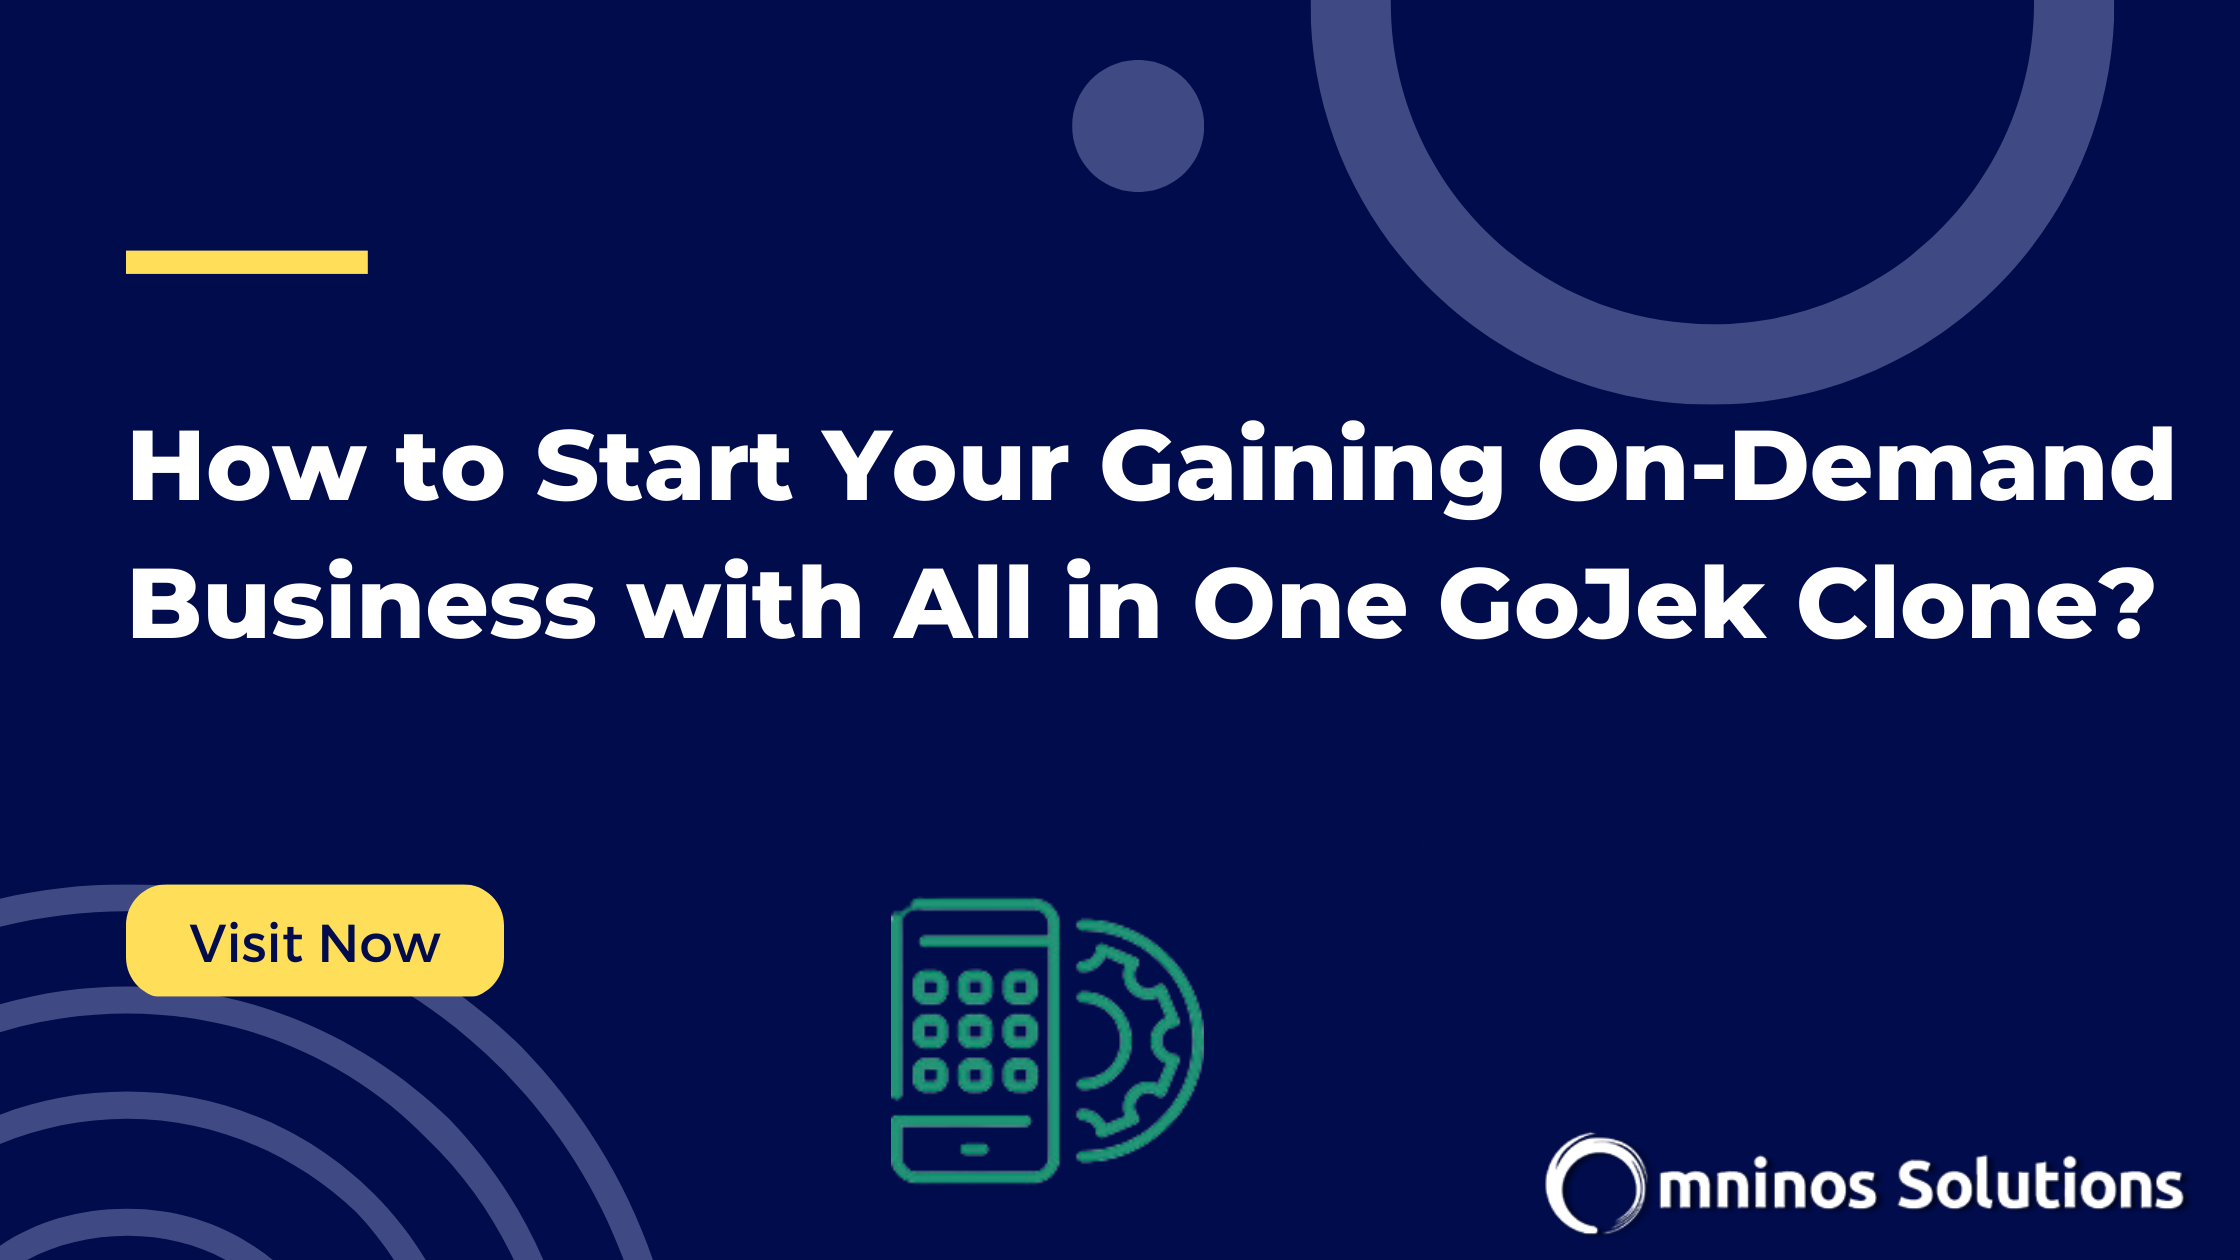 How to Start Your Gaining On-Demand Business with All in One GoJek Clone?